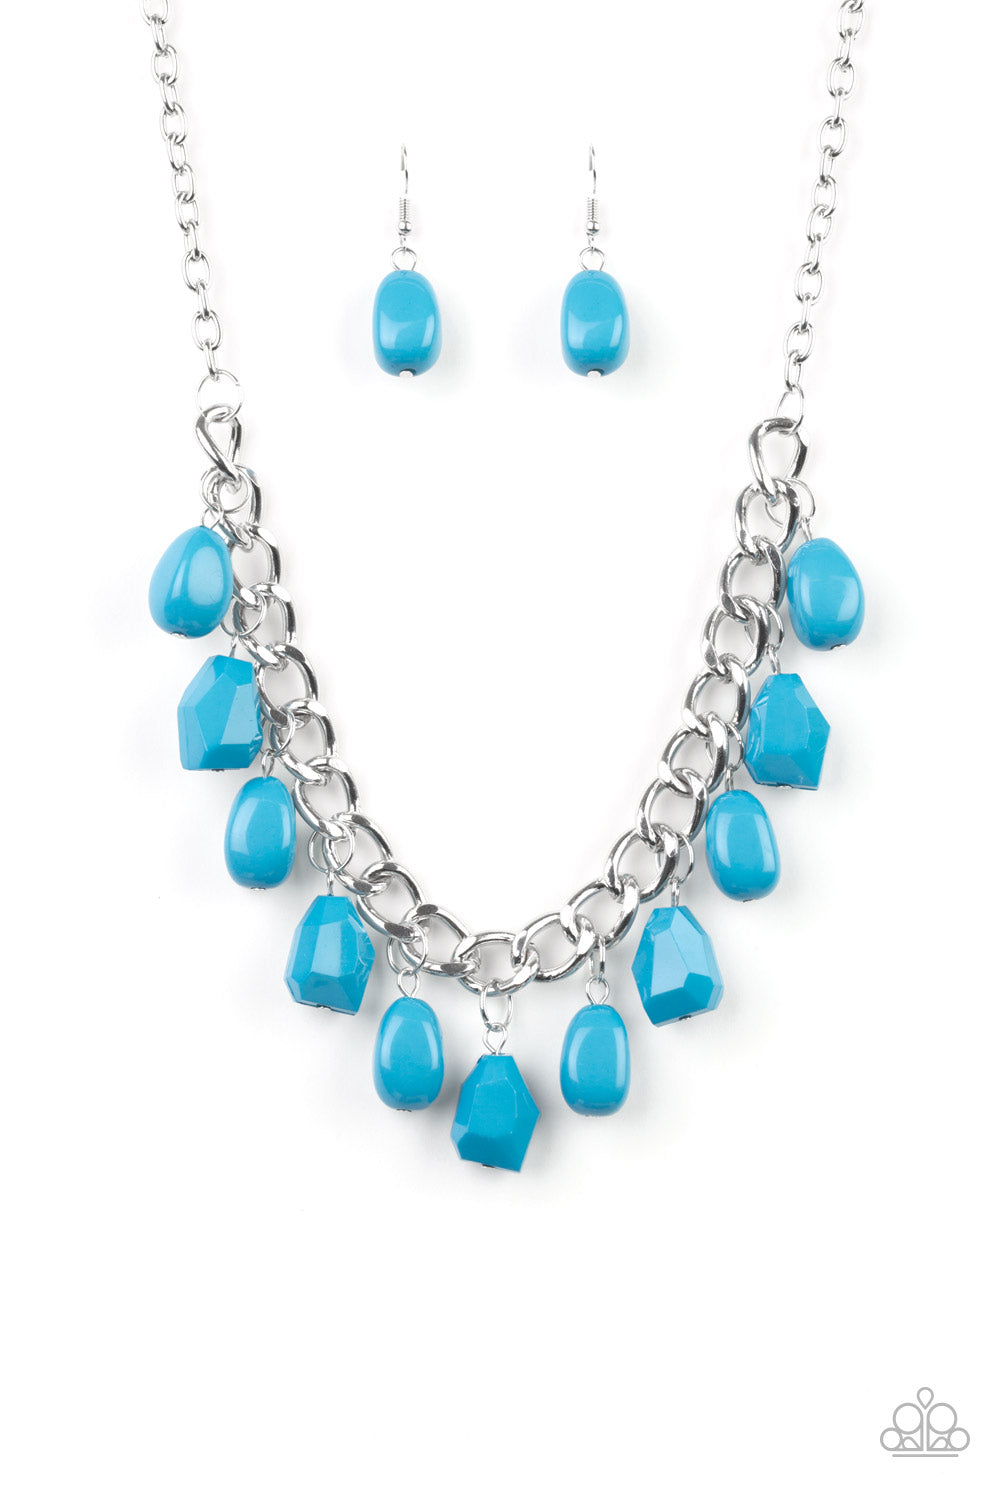 Take The COLOR Wheel! - Blue Necklace - Paparazzi Accessories